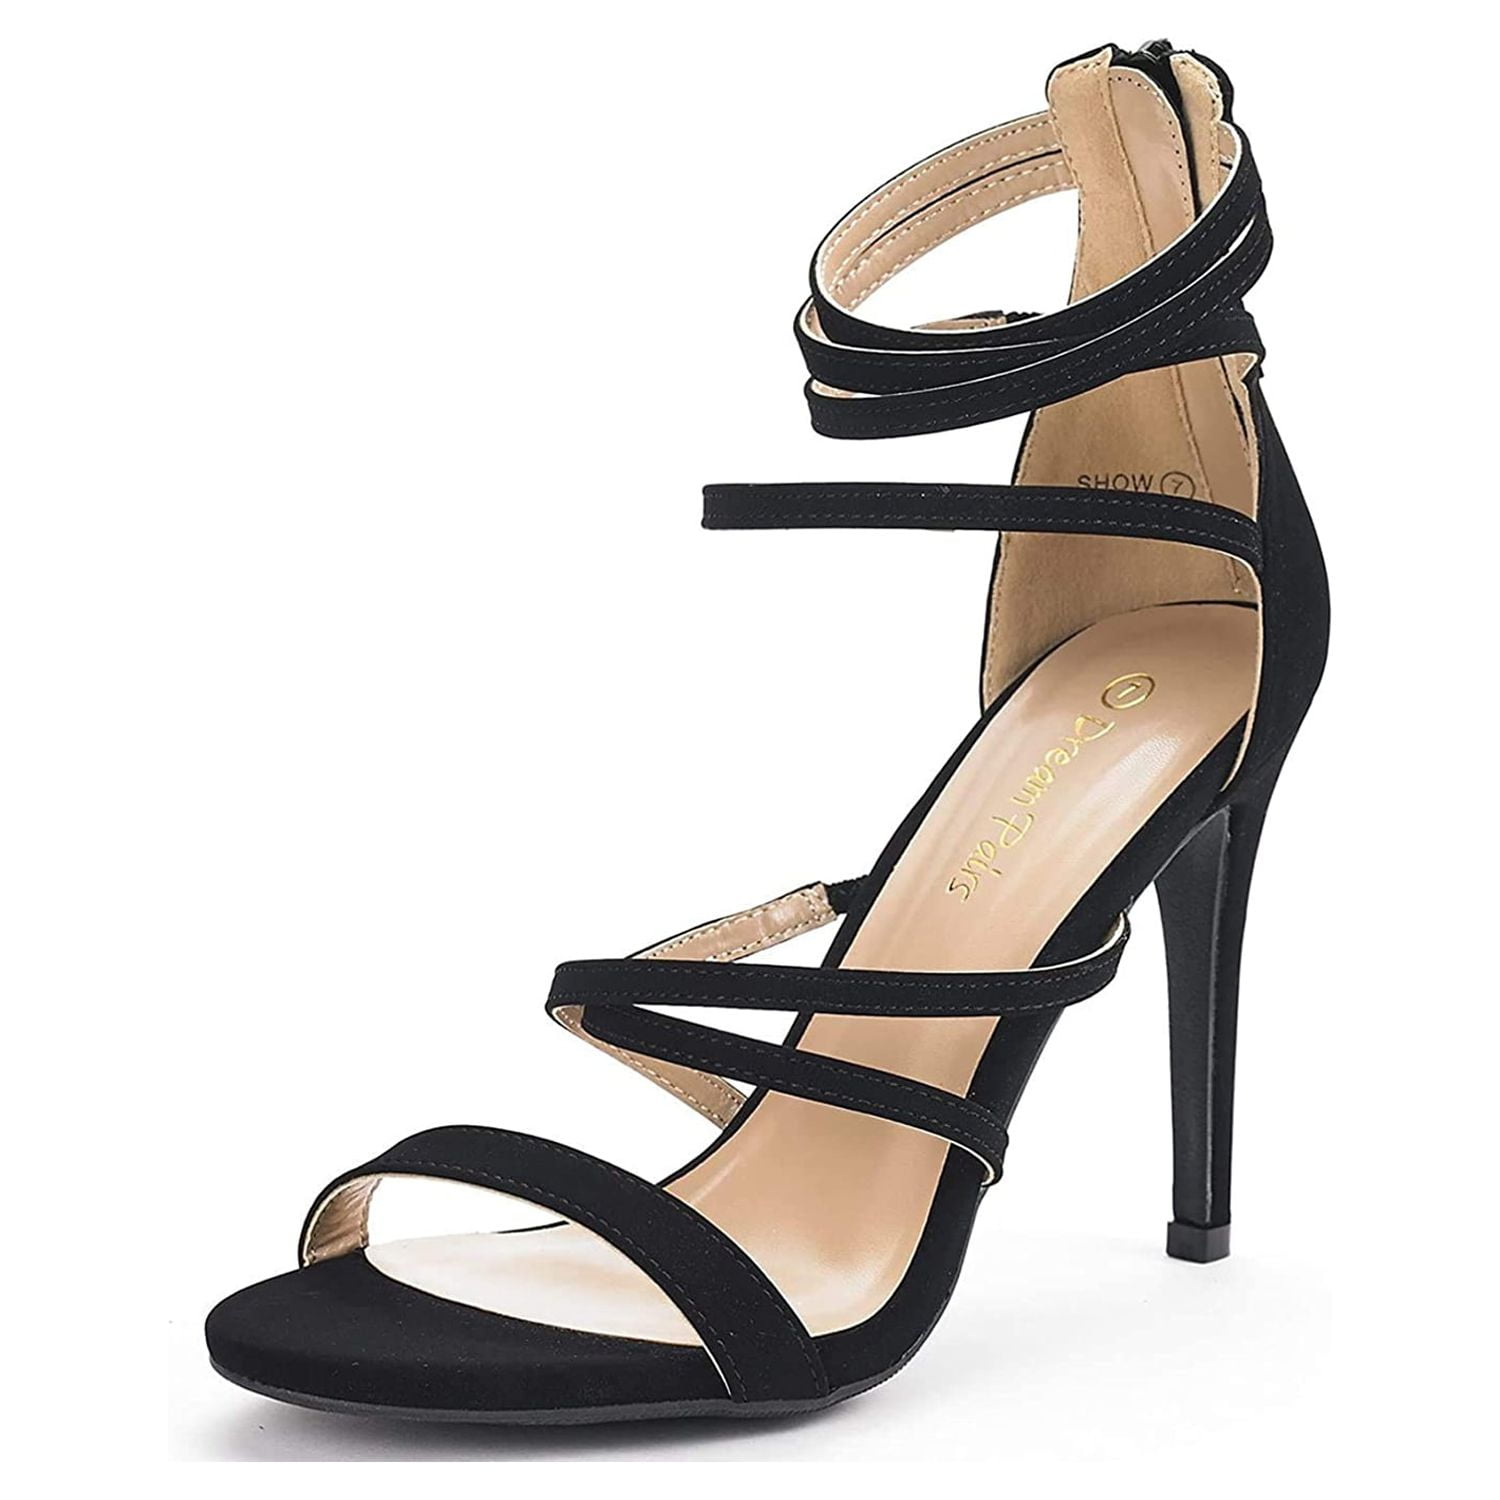 Pairs Heeled Strappy Sandals Dress Shoes Open Toe Ankle Back Sandals SHOW BLACK/NUBUCK Size 9.5 - Walmart.com